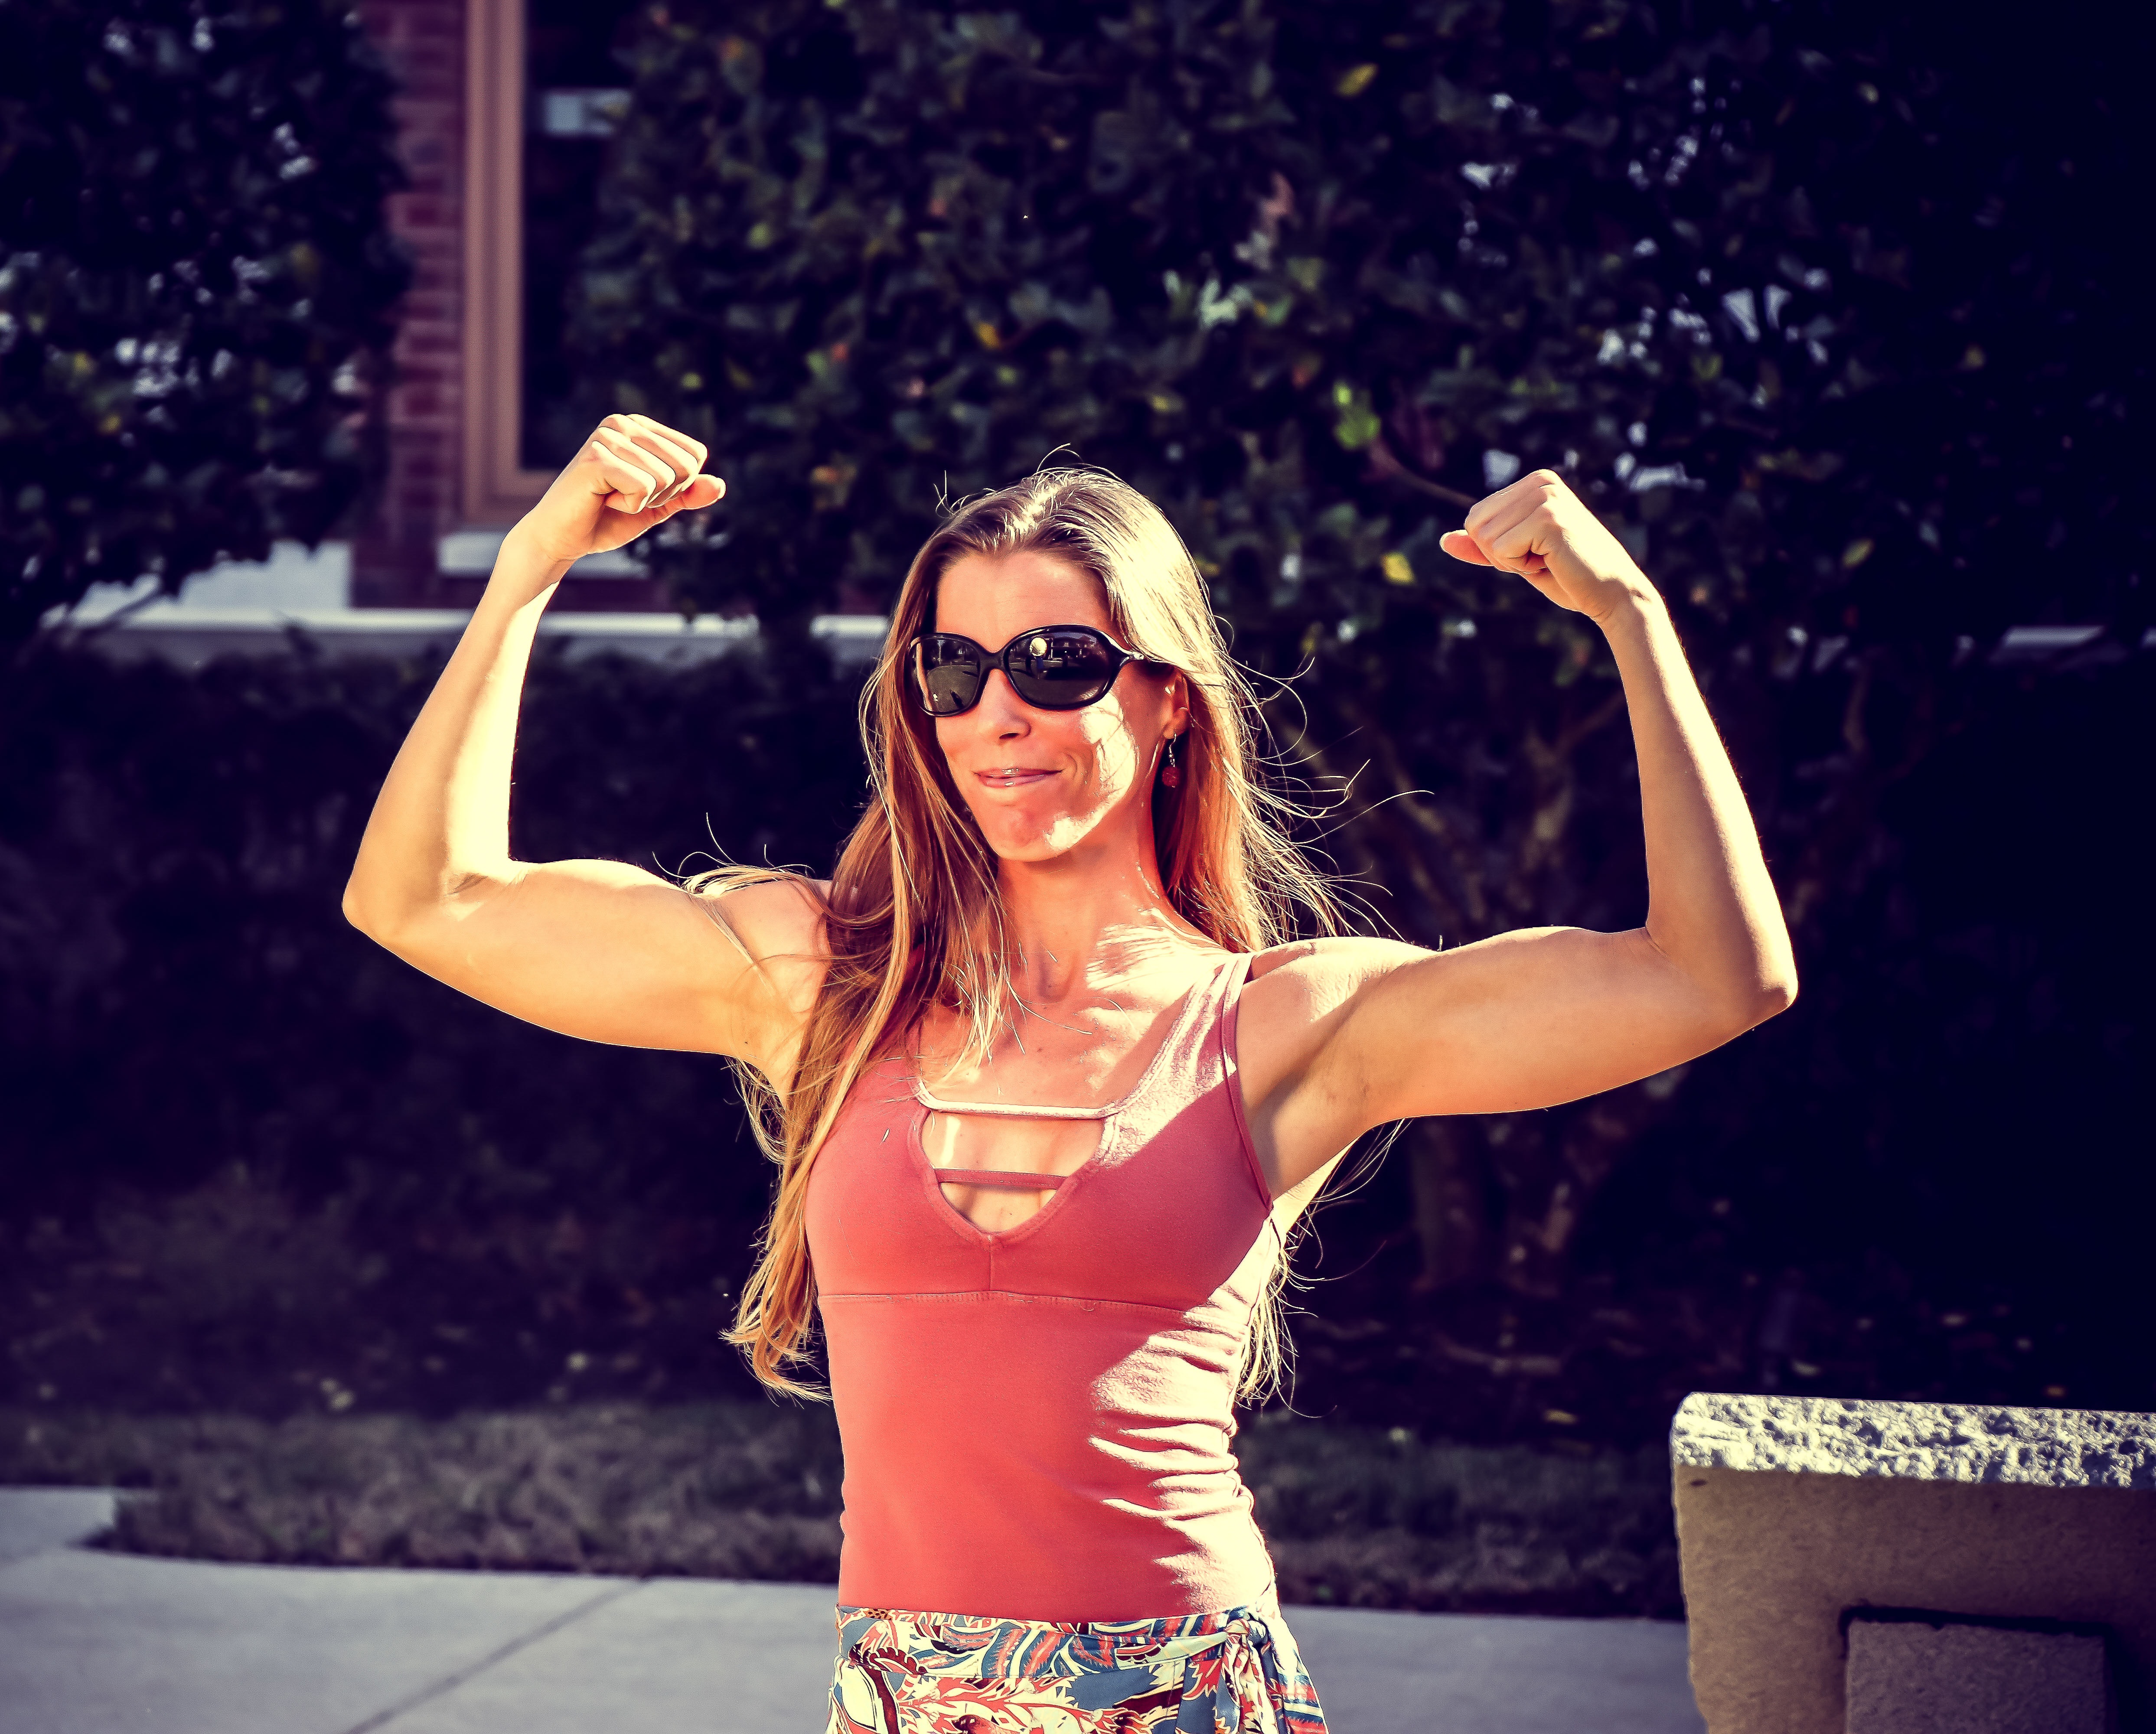 Woman showing muscles photo